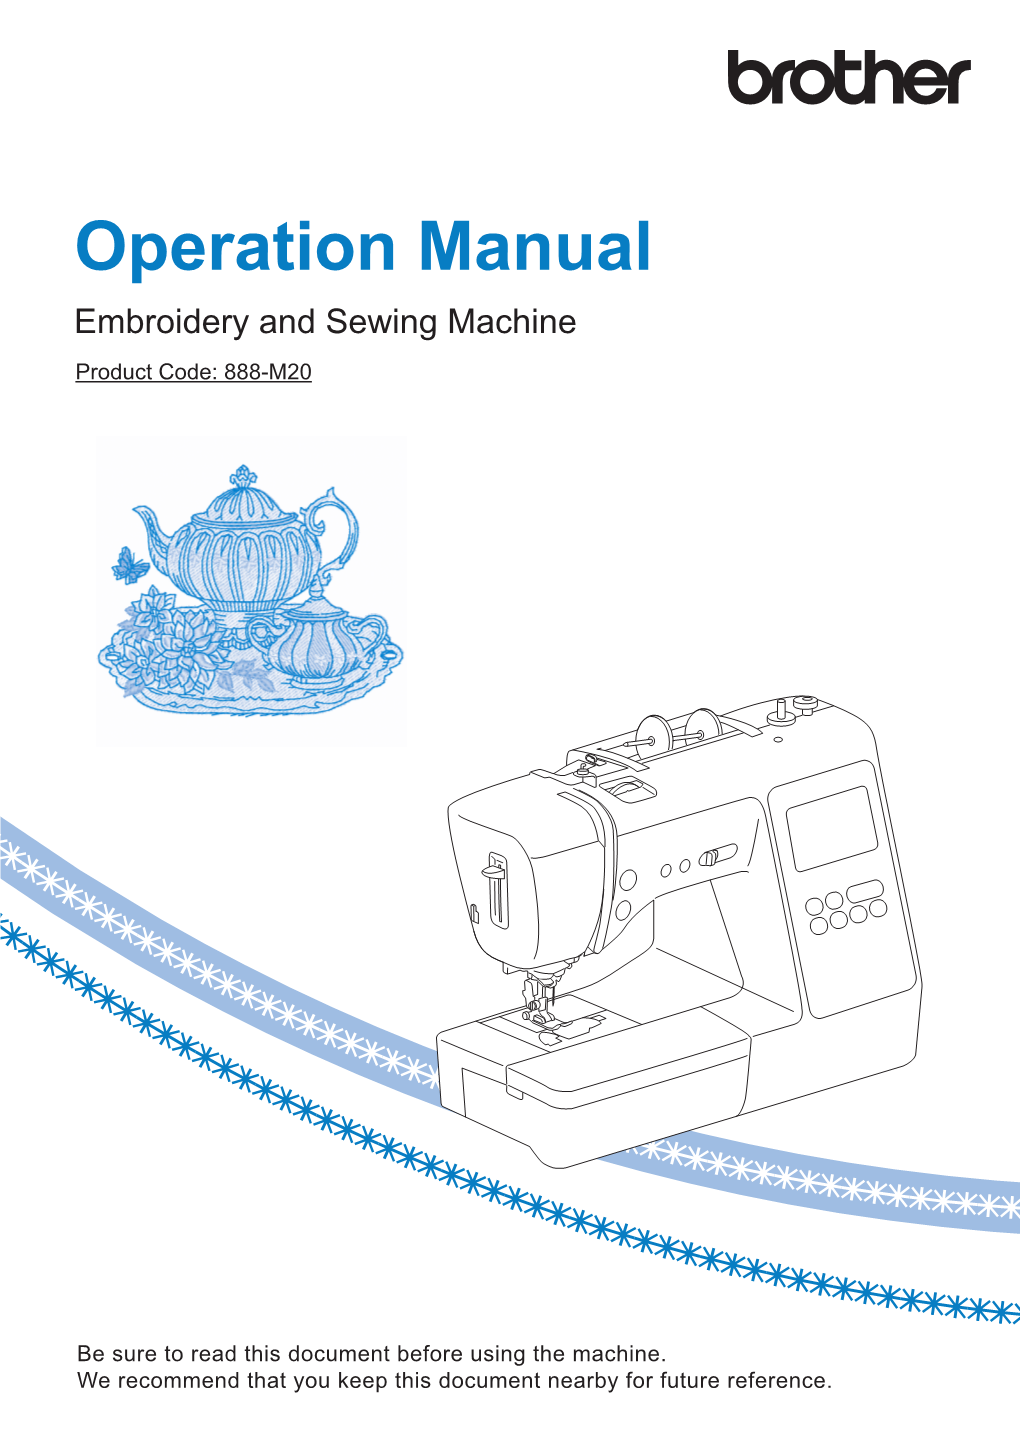 Operation Manual Embroidery and Sewing Machine Product Code: 888-M20